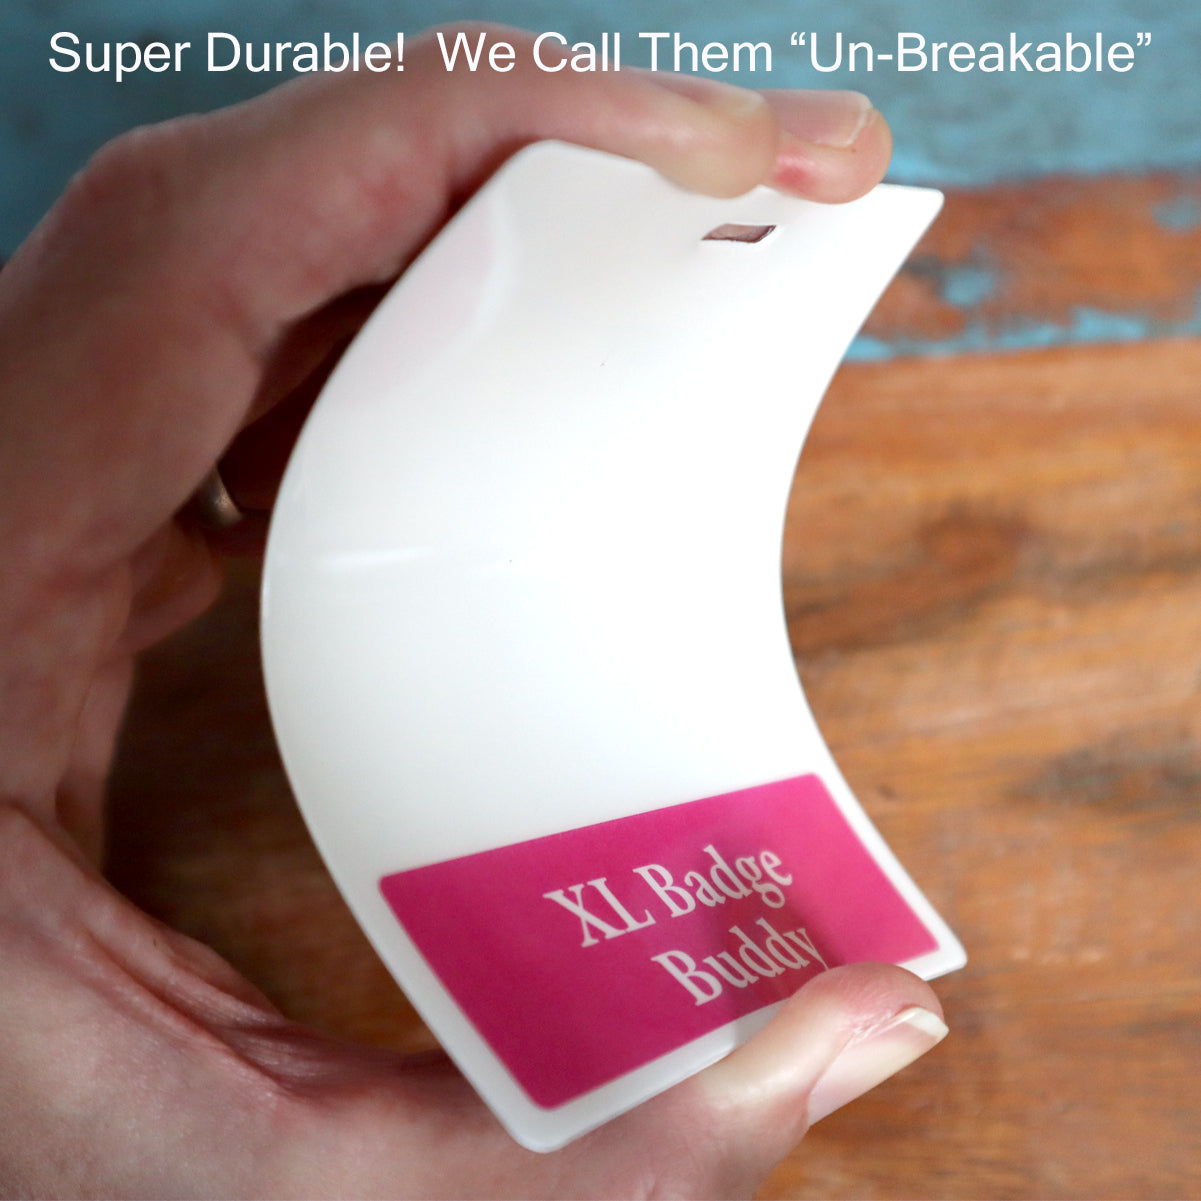 Close-up of a hand bending a white plastic badge labeled "Oversized STUDENT NURSE Badge Buddy - XL Badge Backer for Student Nurses - Horizontal Hospital ID Badge Buddies," demonstrating its durable design with the text "Super Durable! We Call Them 'Un-Breakable'" above.